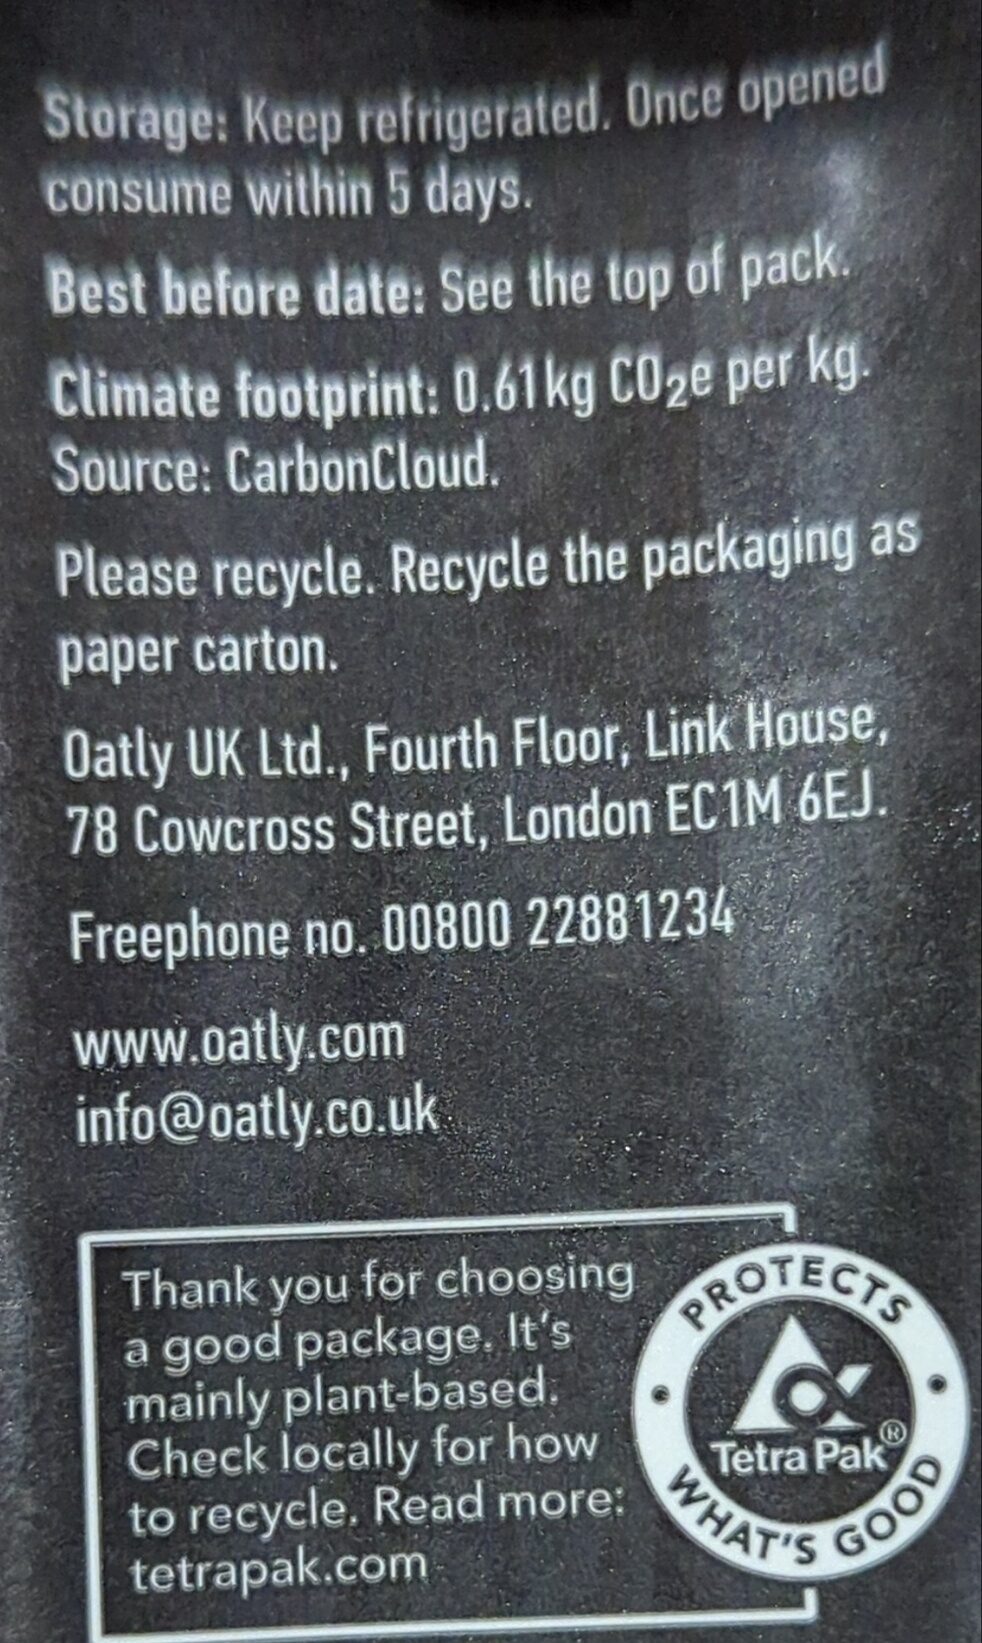 Creamy oat - Recycling instructions and/or packaging information